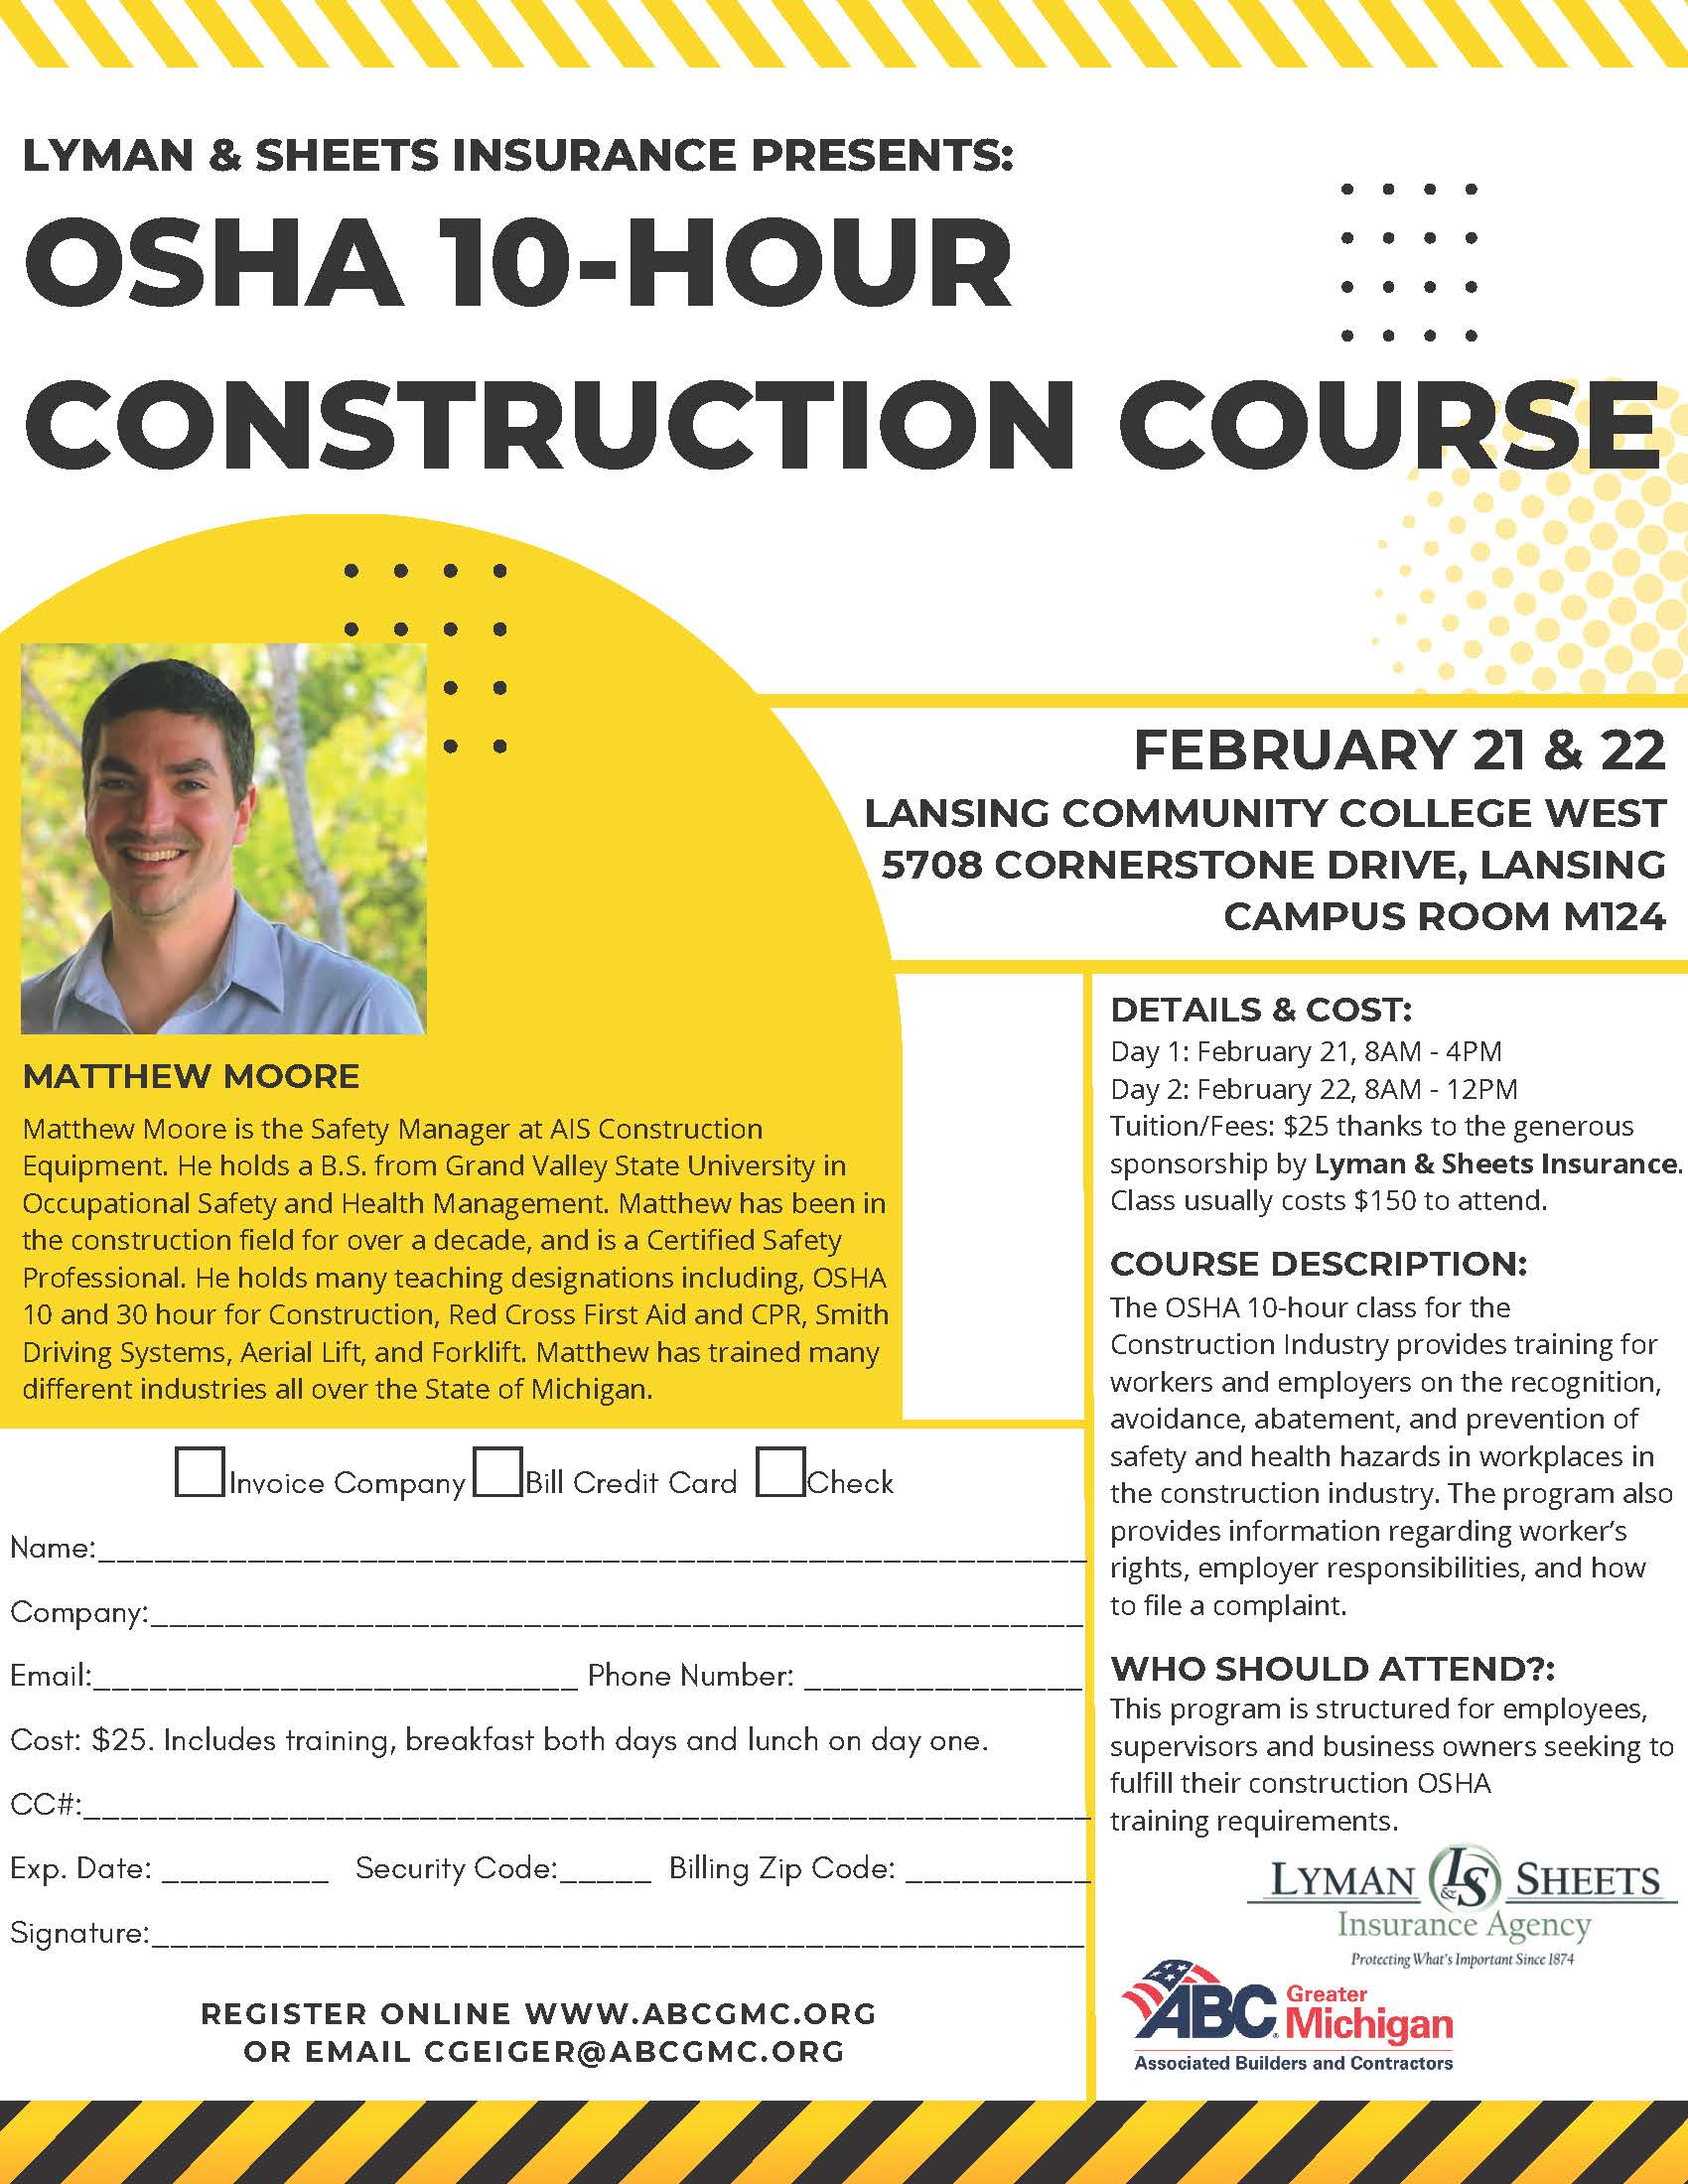 OSHA Construction Course (SOLD OUT)